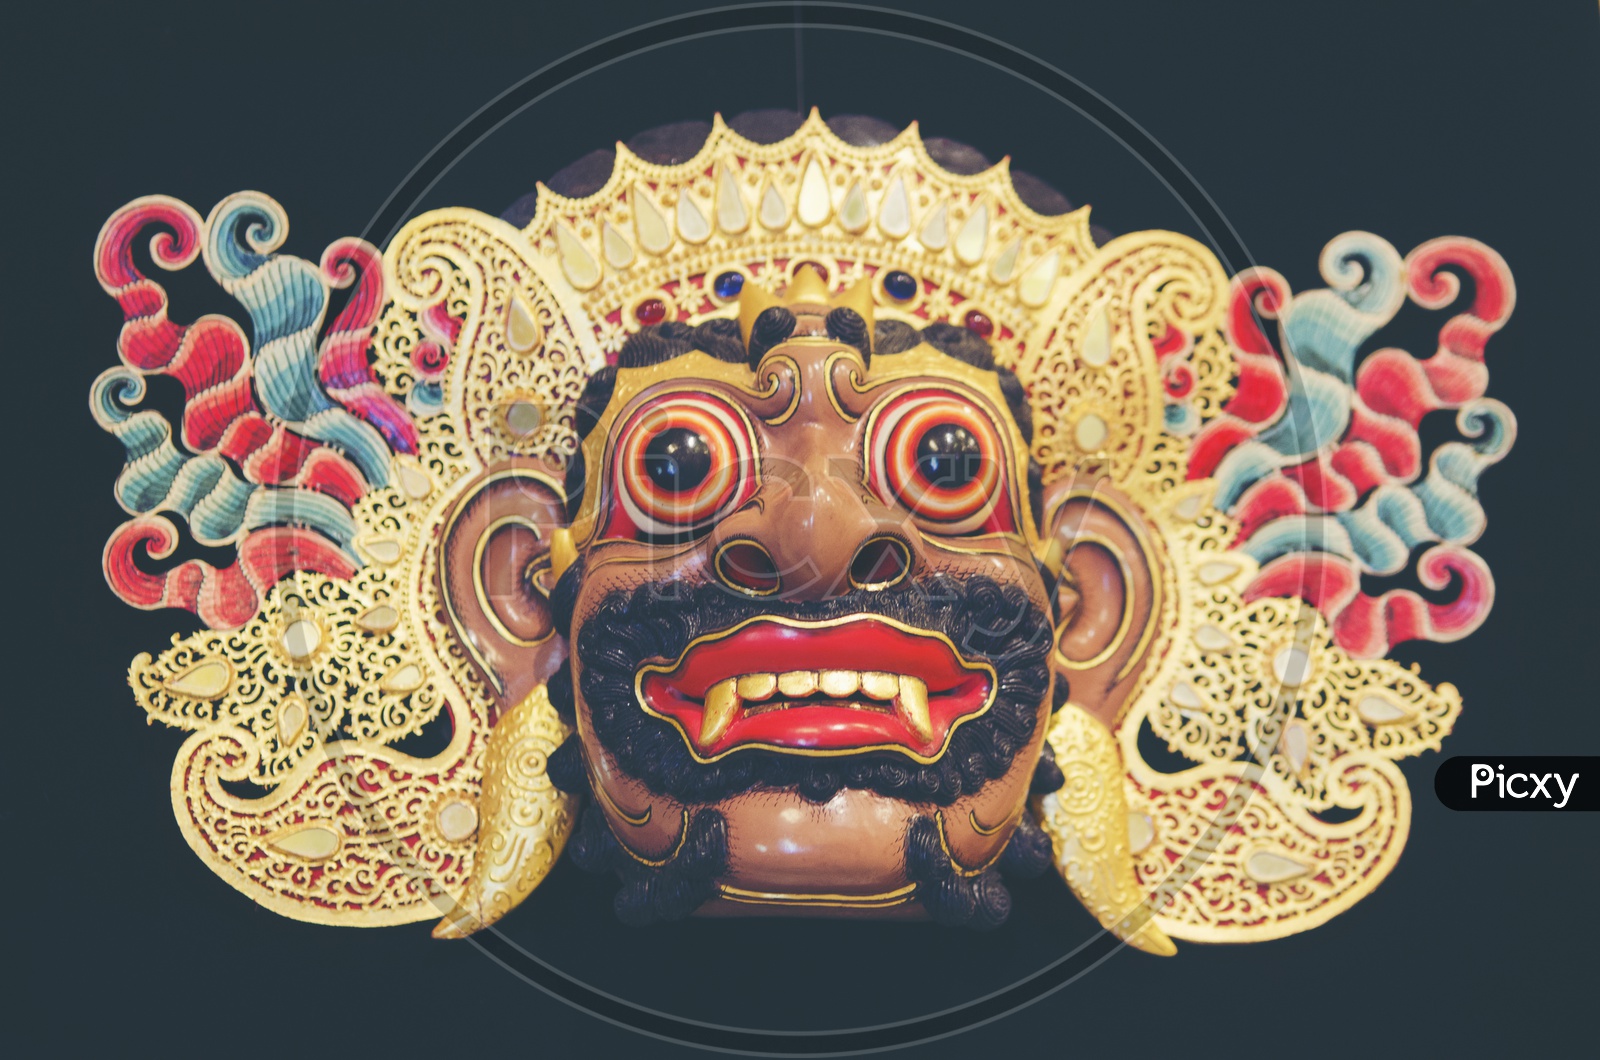 Wooden Barong mask from Tegallalang in Bali, Indonesia